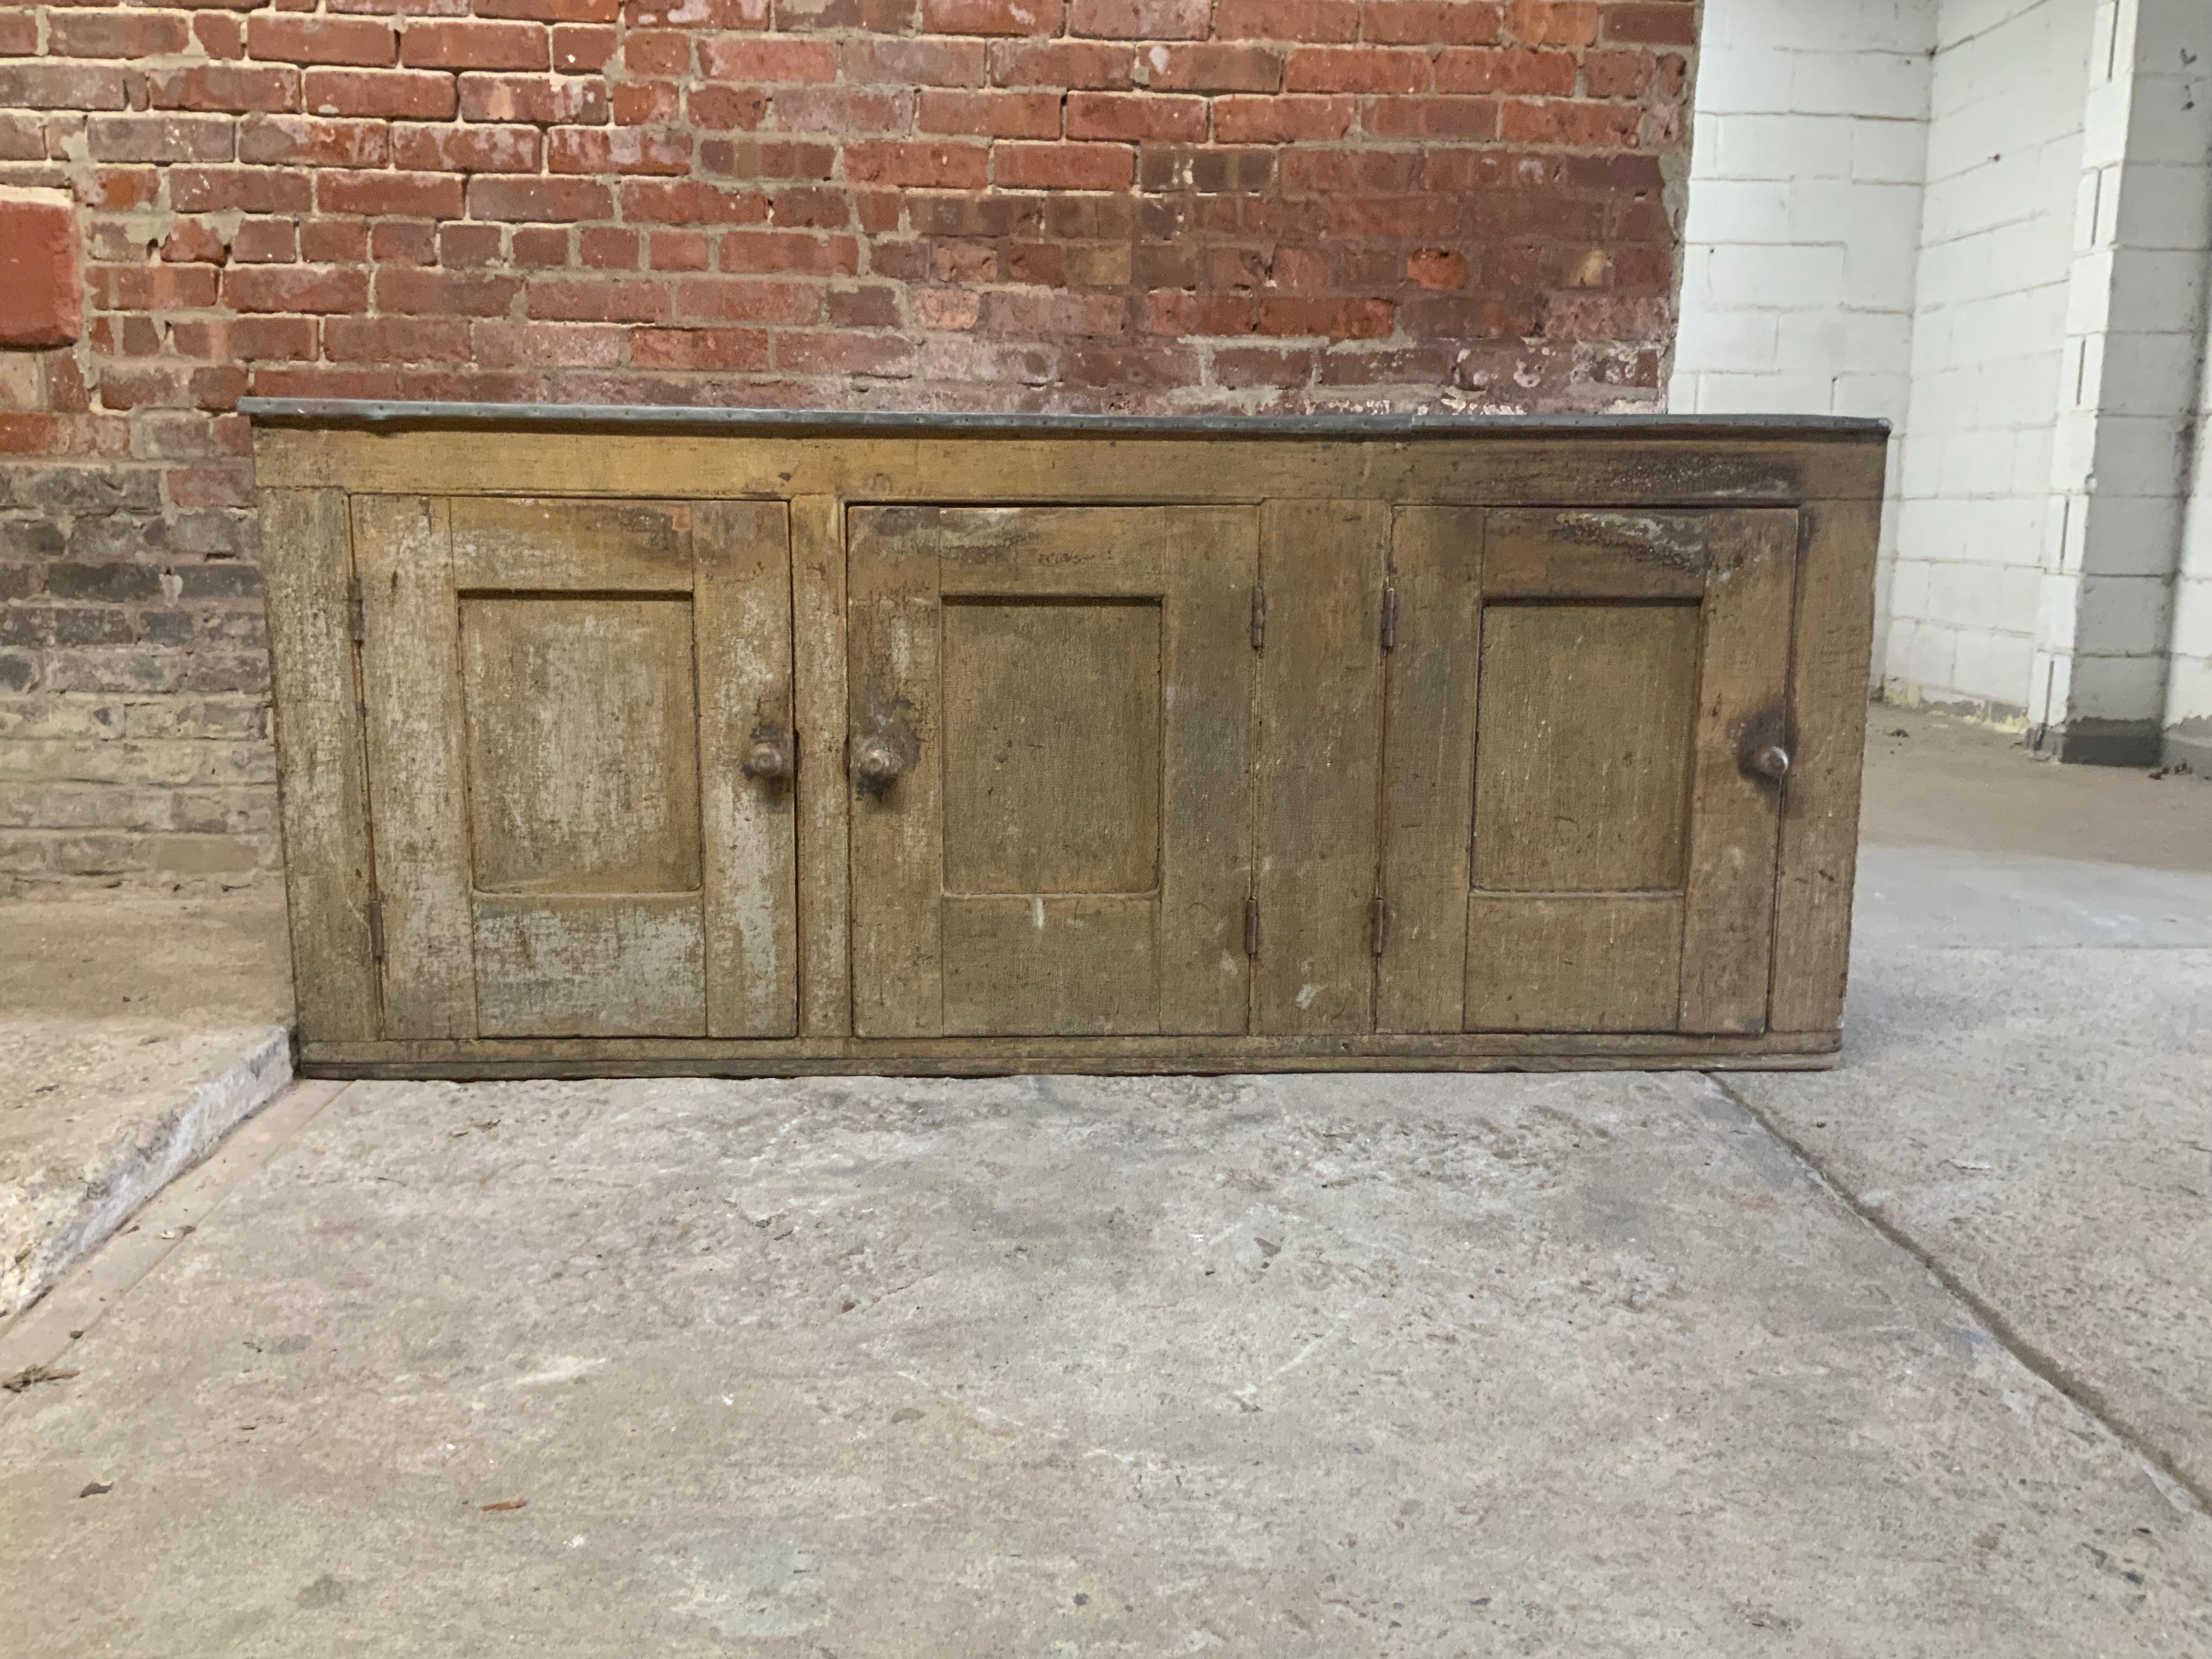 A wonderful piece of 19th century Americana. This painted pine dry sink cabinet has storage on the bottom and a heavy duty zinc top. The wear, surface and patina add to the history and charm of this particular piece. Originally from a Rockland